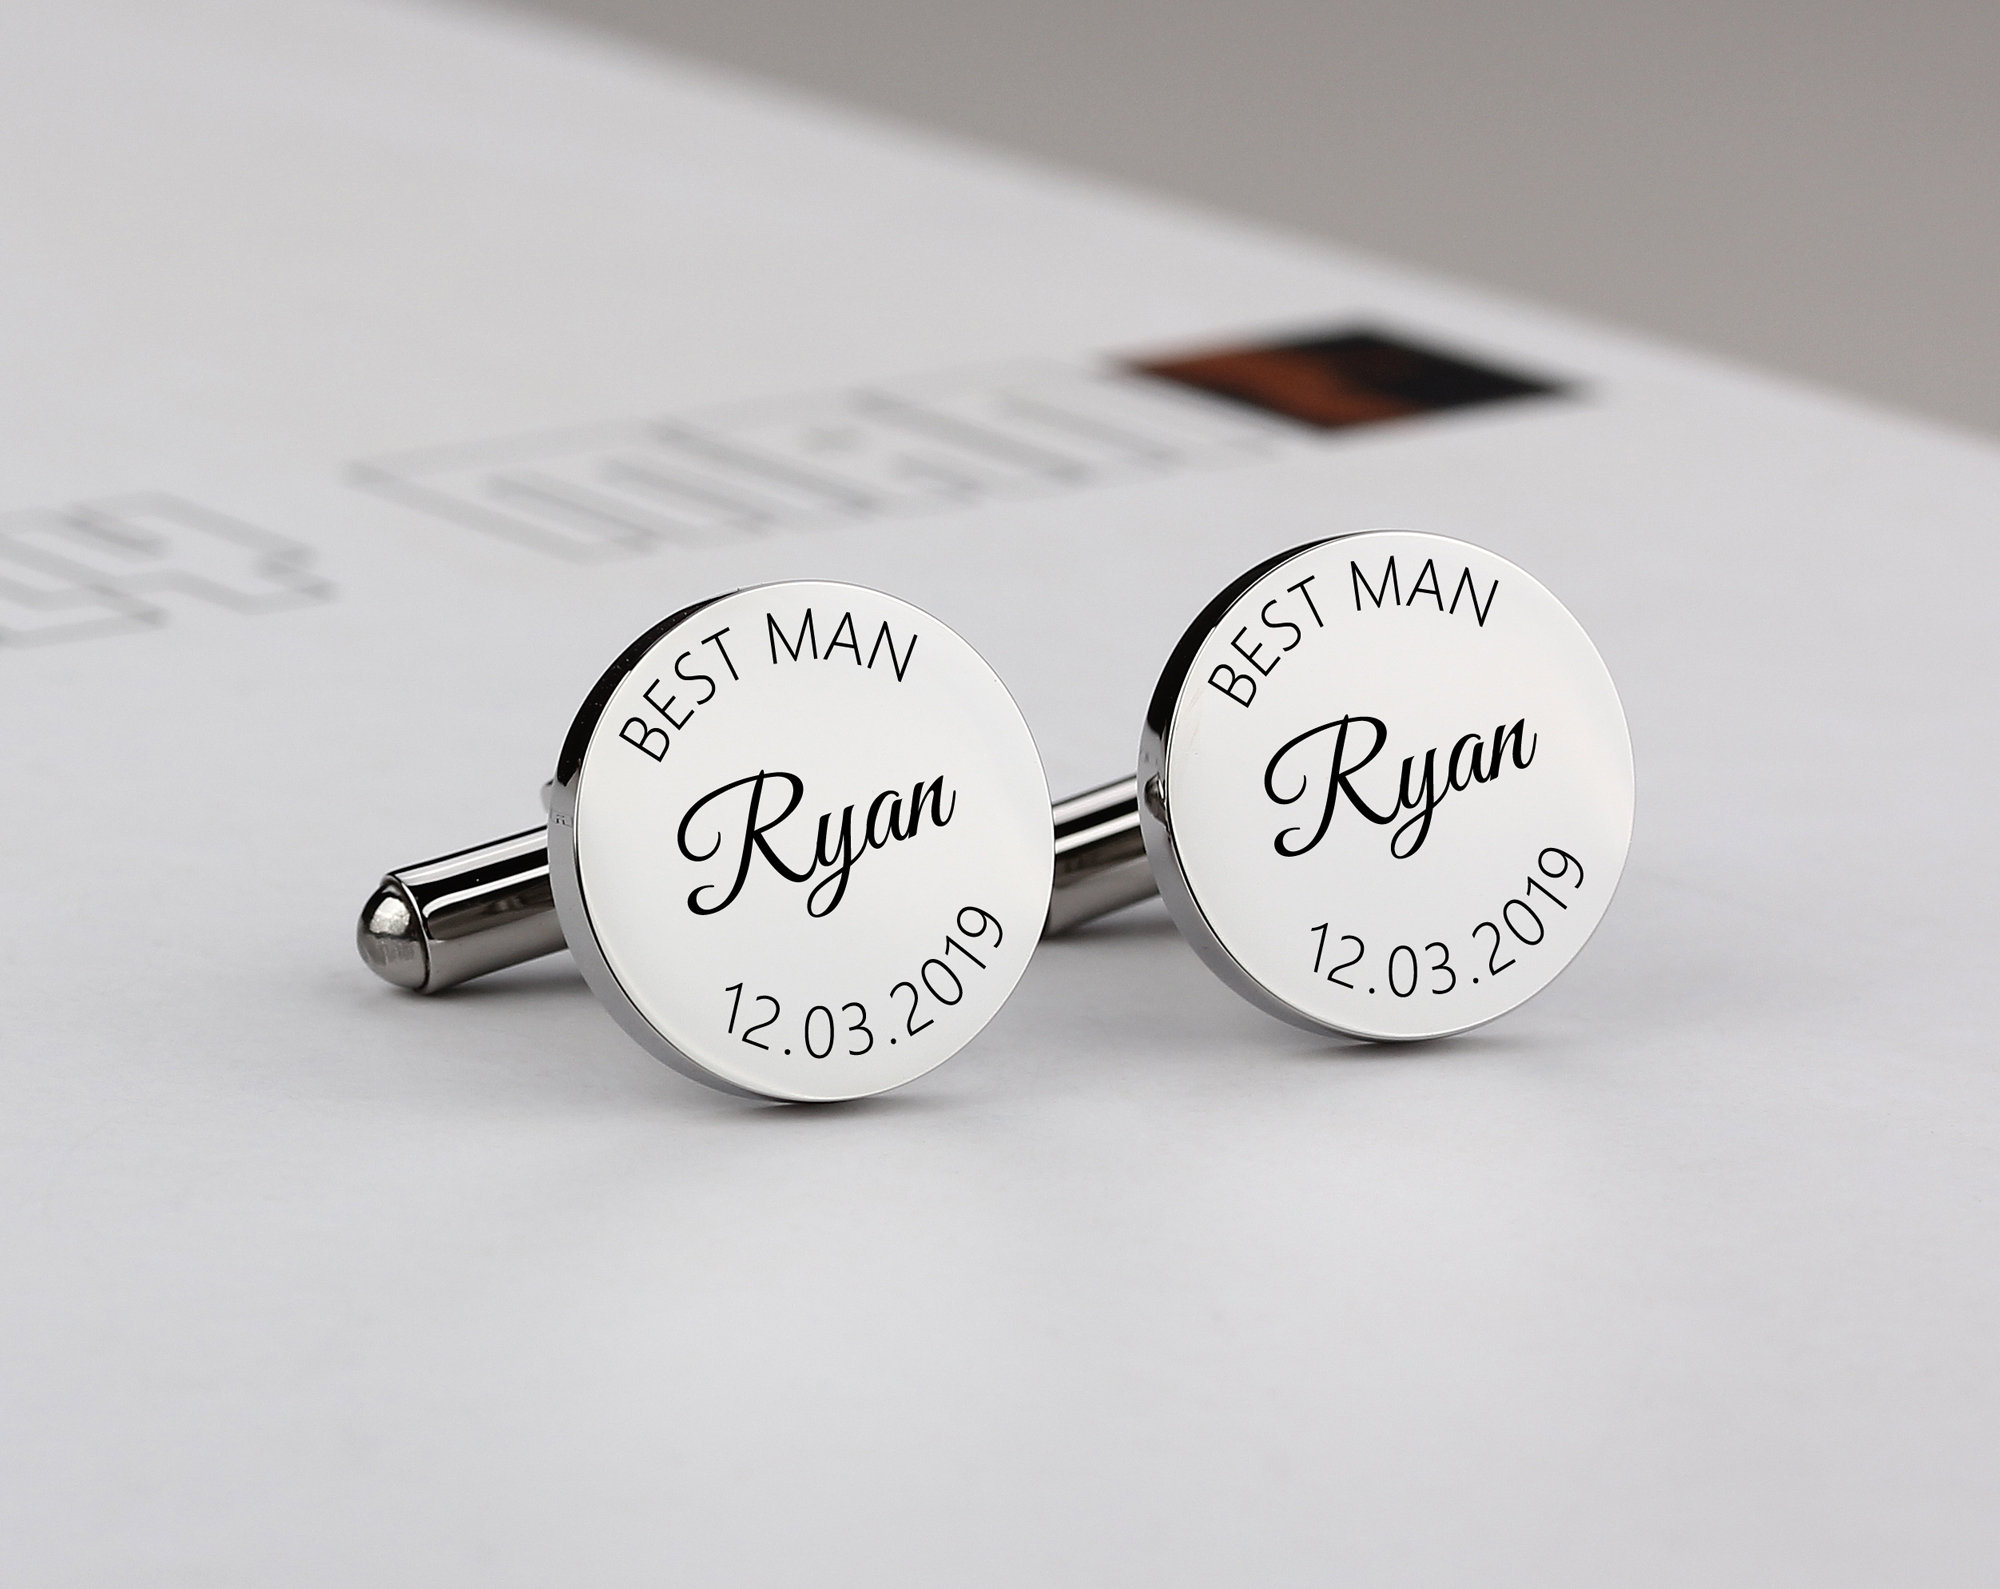 Personalised Engraved Cufflinks Dont Be Late Personalised Cufflinks Cufflinks Bride to Groom Wedding Cufflinks Groom Cufflinks